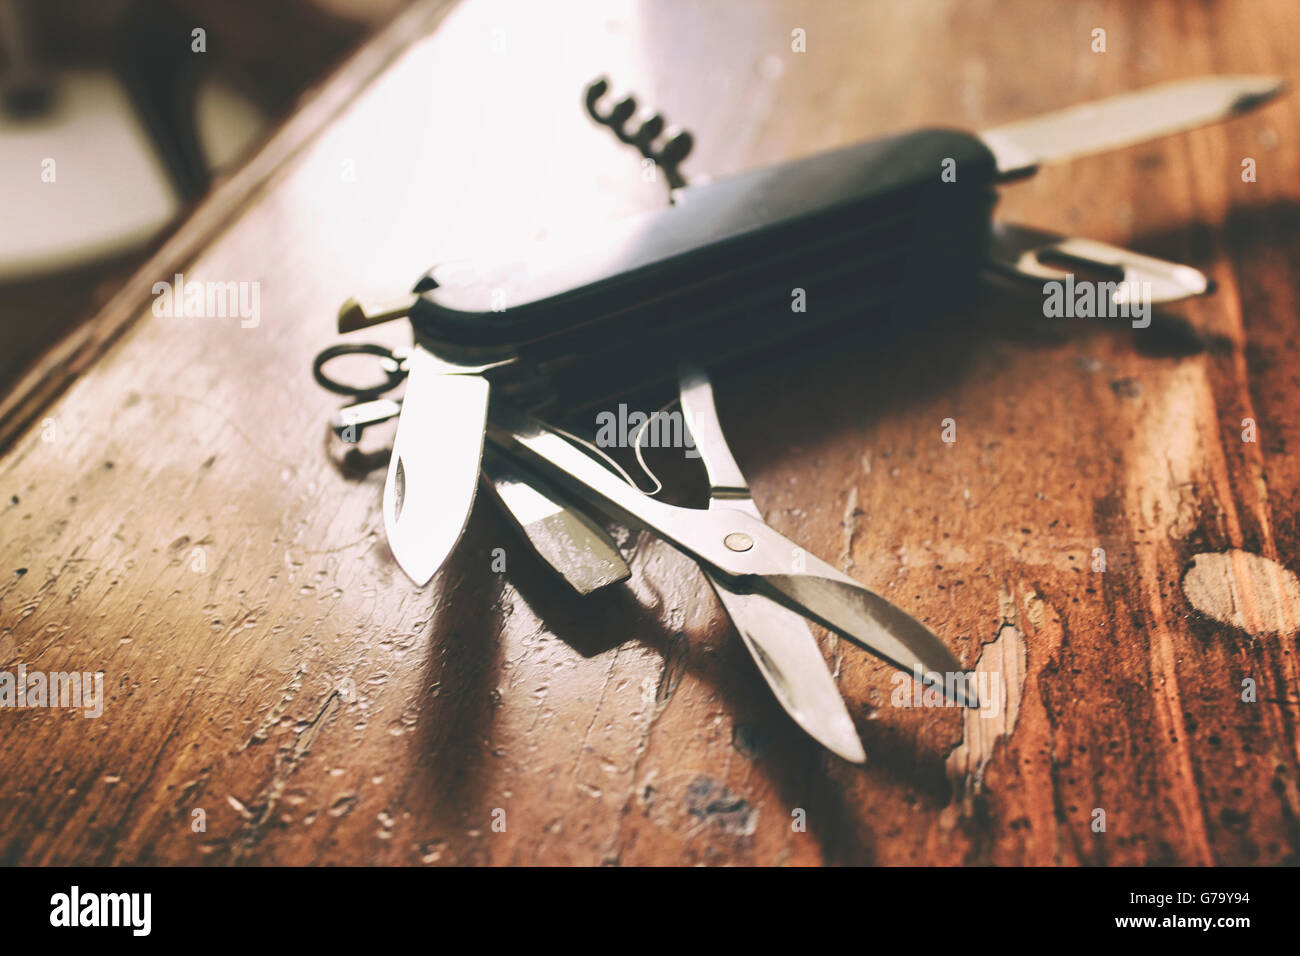 Photograph of a swiss style knife Stock Photo